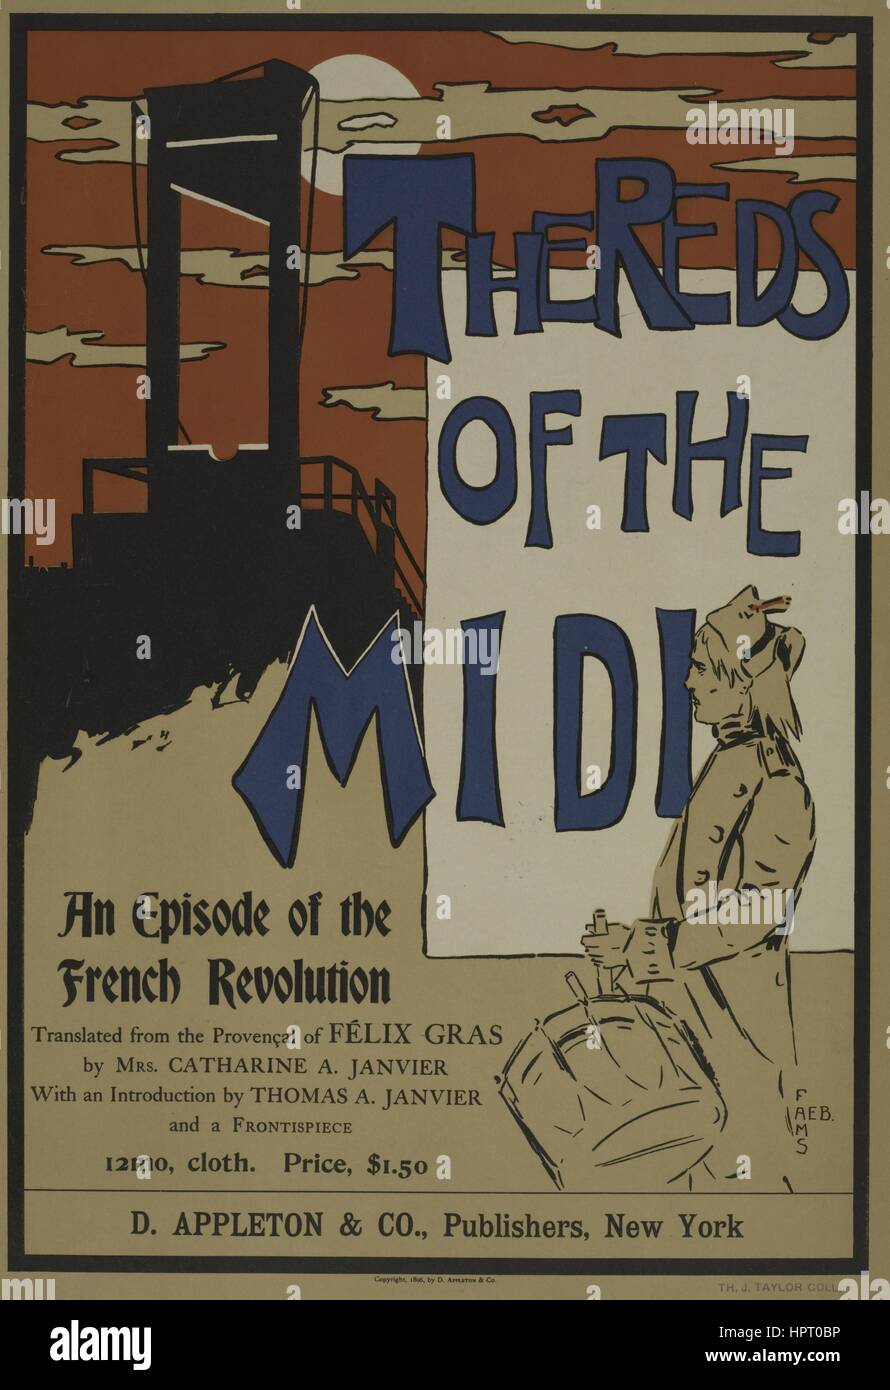 Poster advertising the novel 'The Reds of the Midi' about the french revolution, 1903. From the New York Public Library. Stock Photo